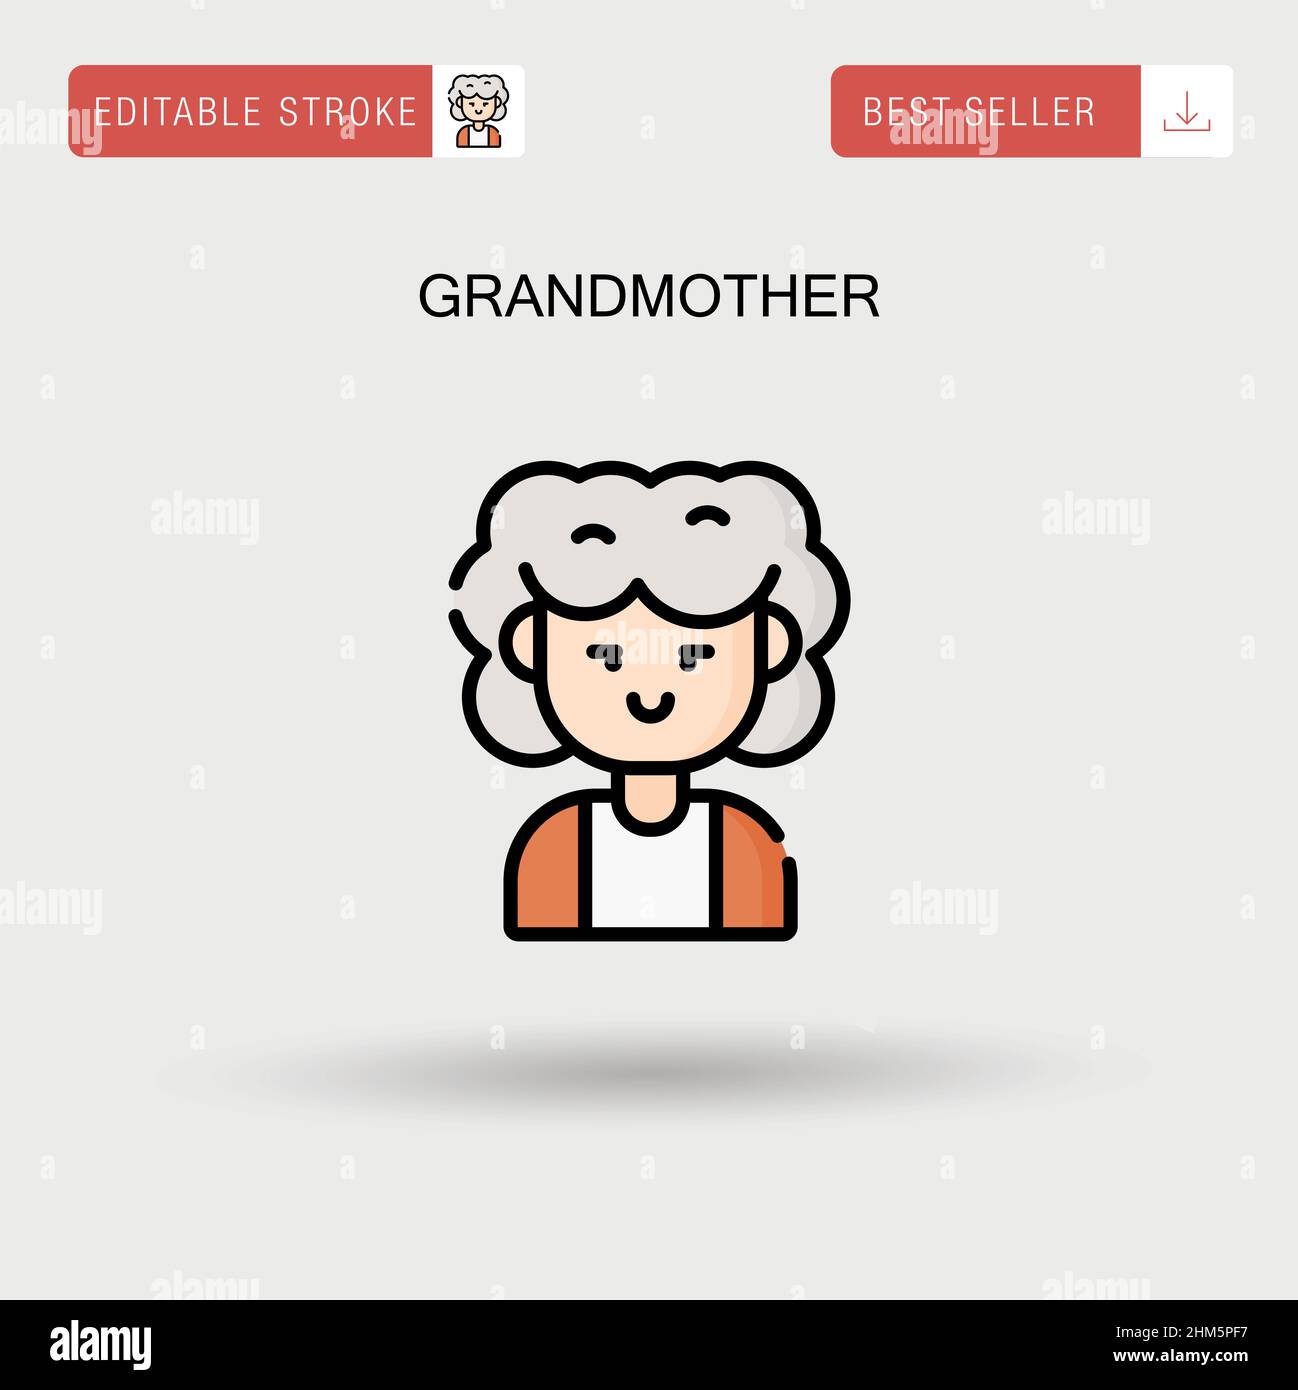 Grandmother Simple vector icon. Stock Vector